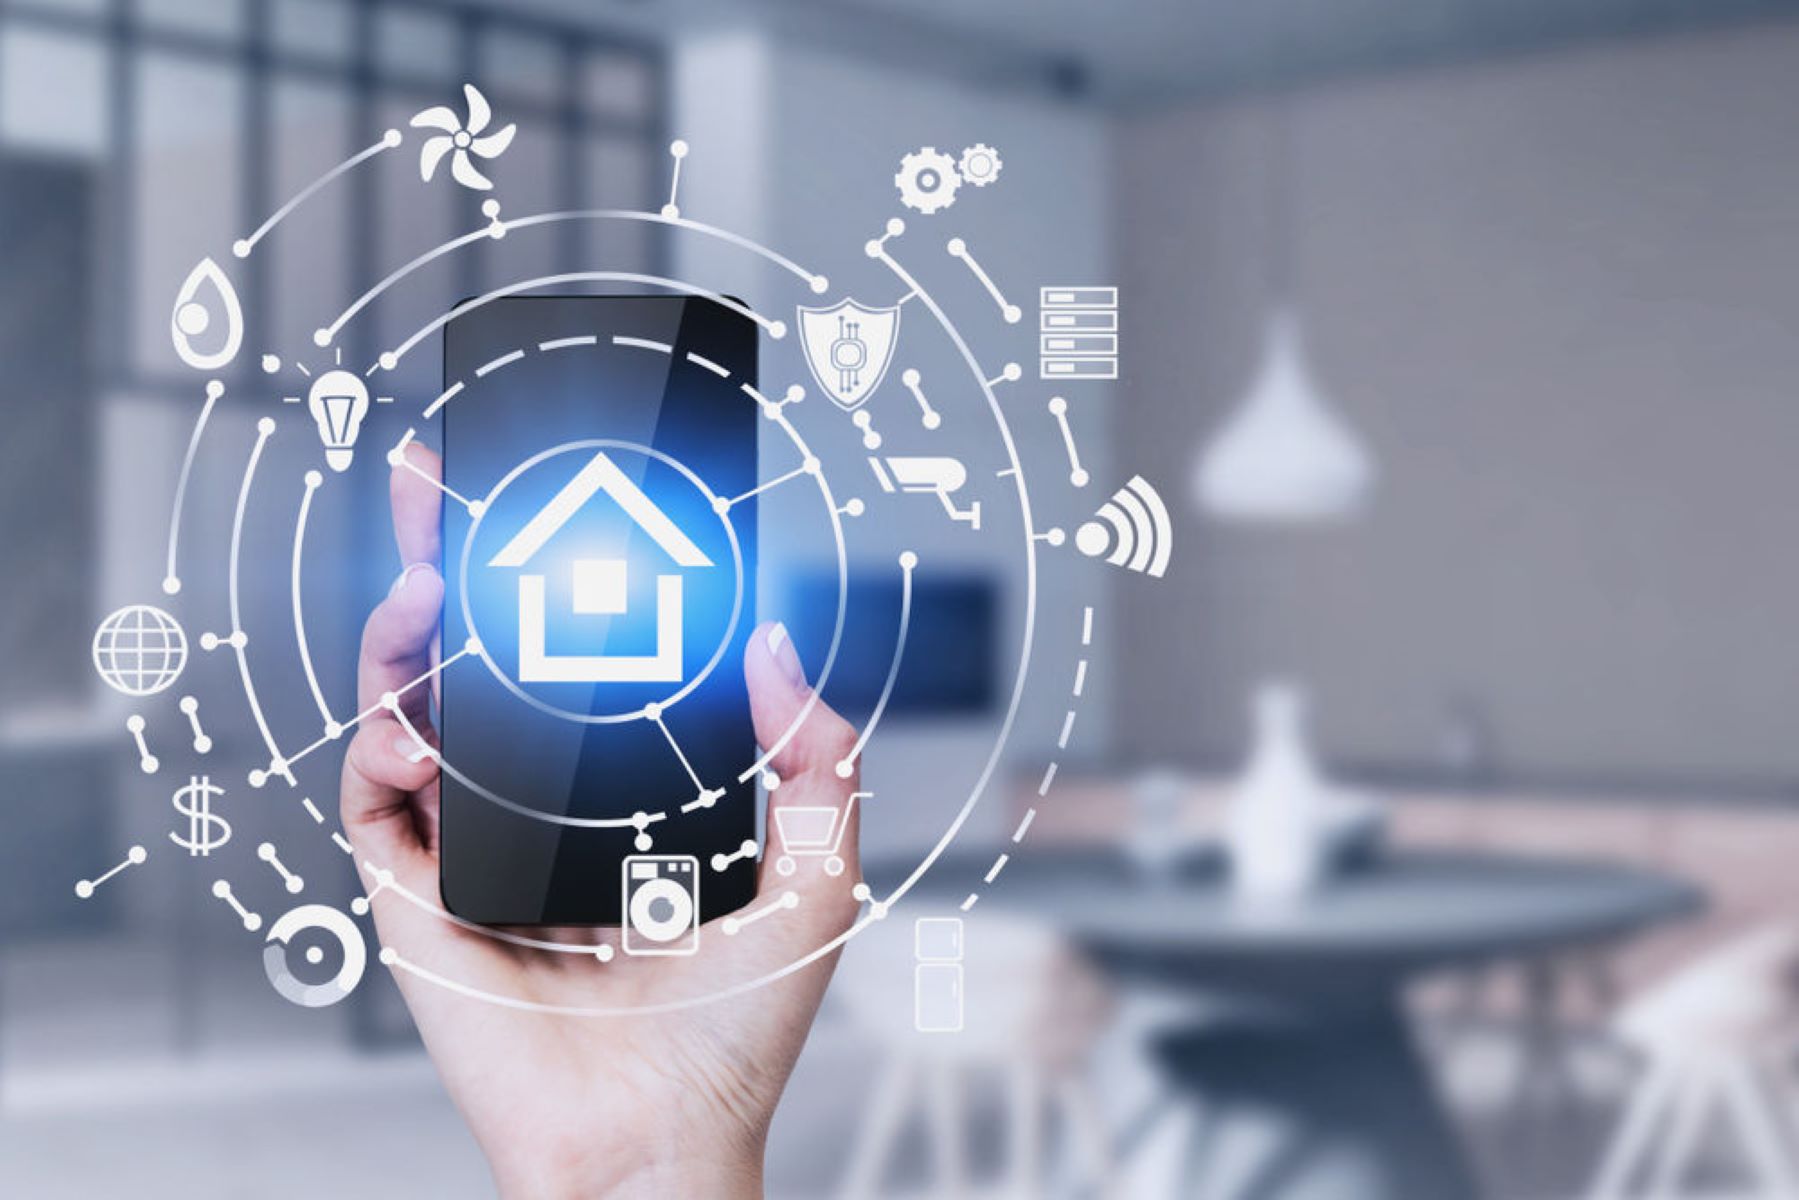 What Are The Benefits Of Having A Smart Home